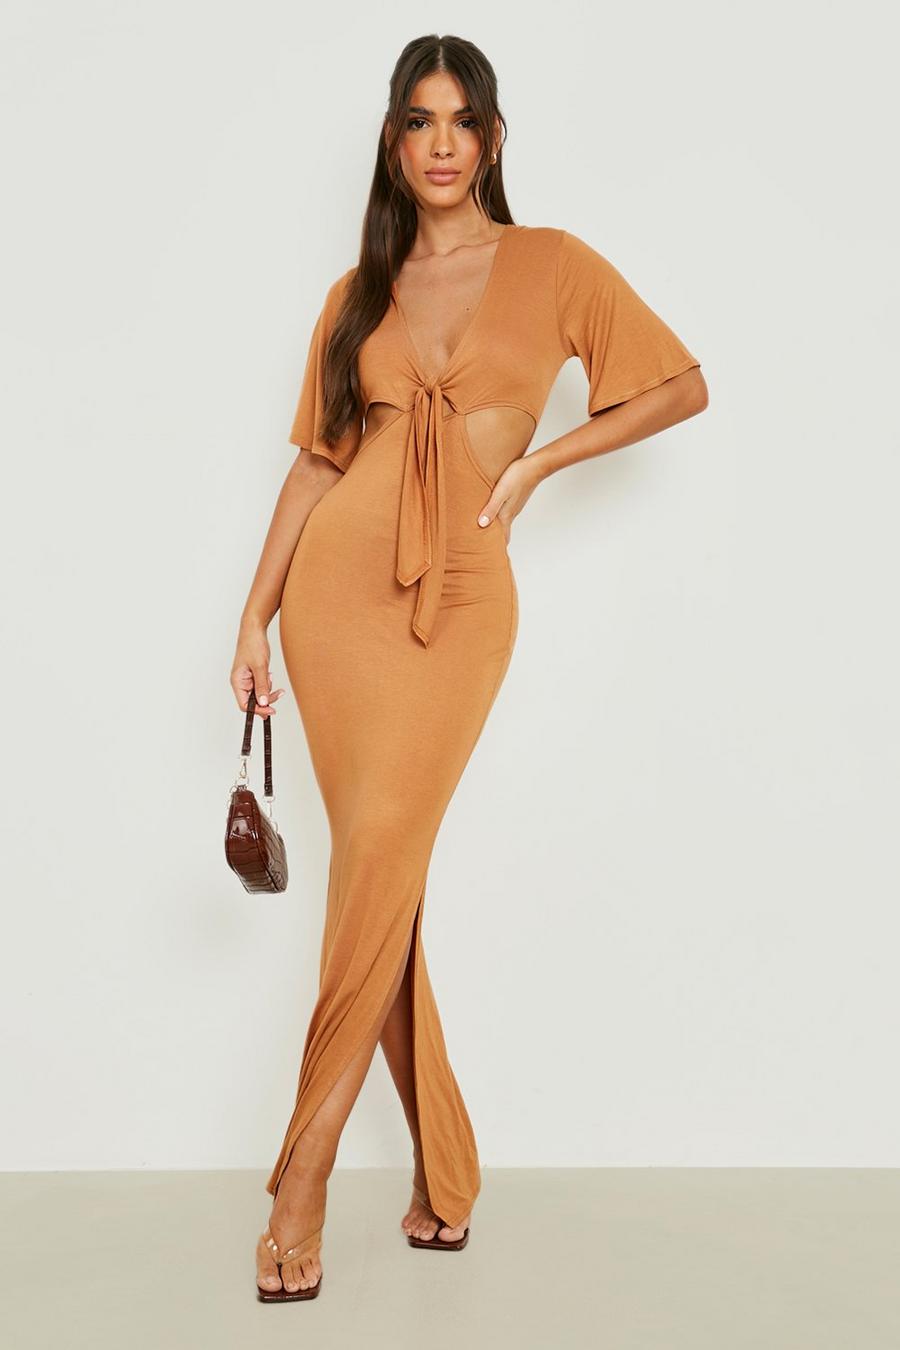 Mustard yellow Cut Out Tie Front Maxi Dress